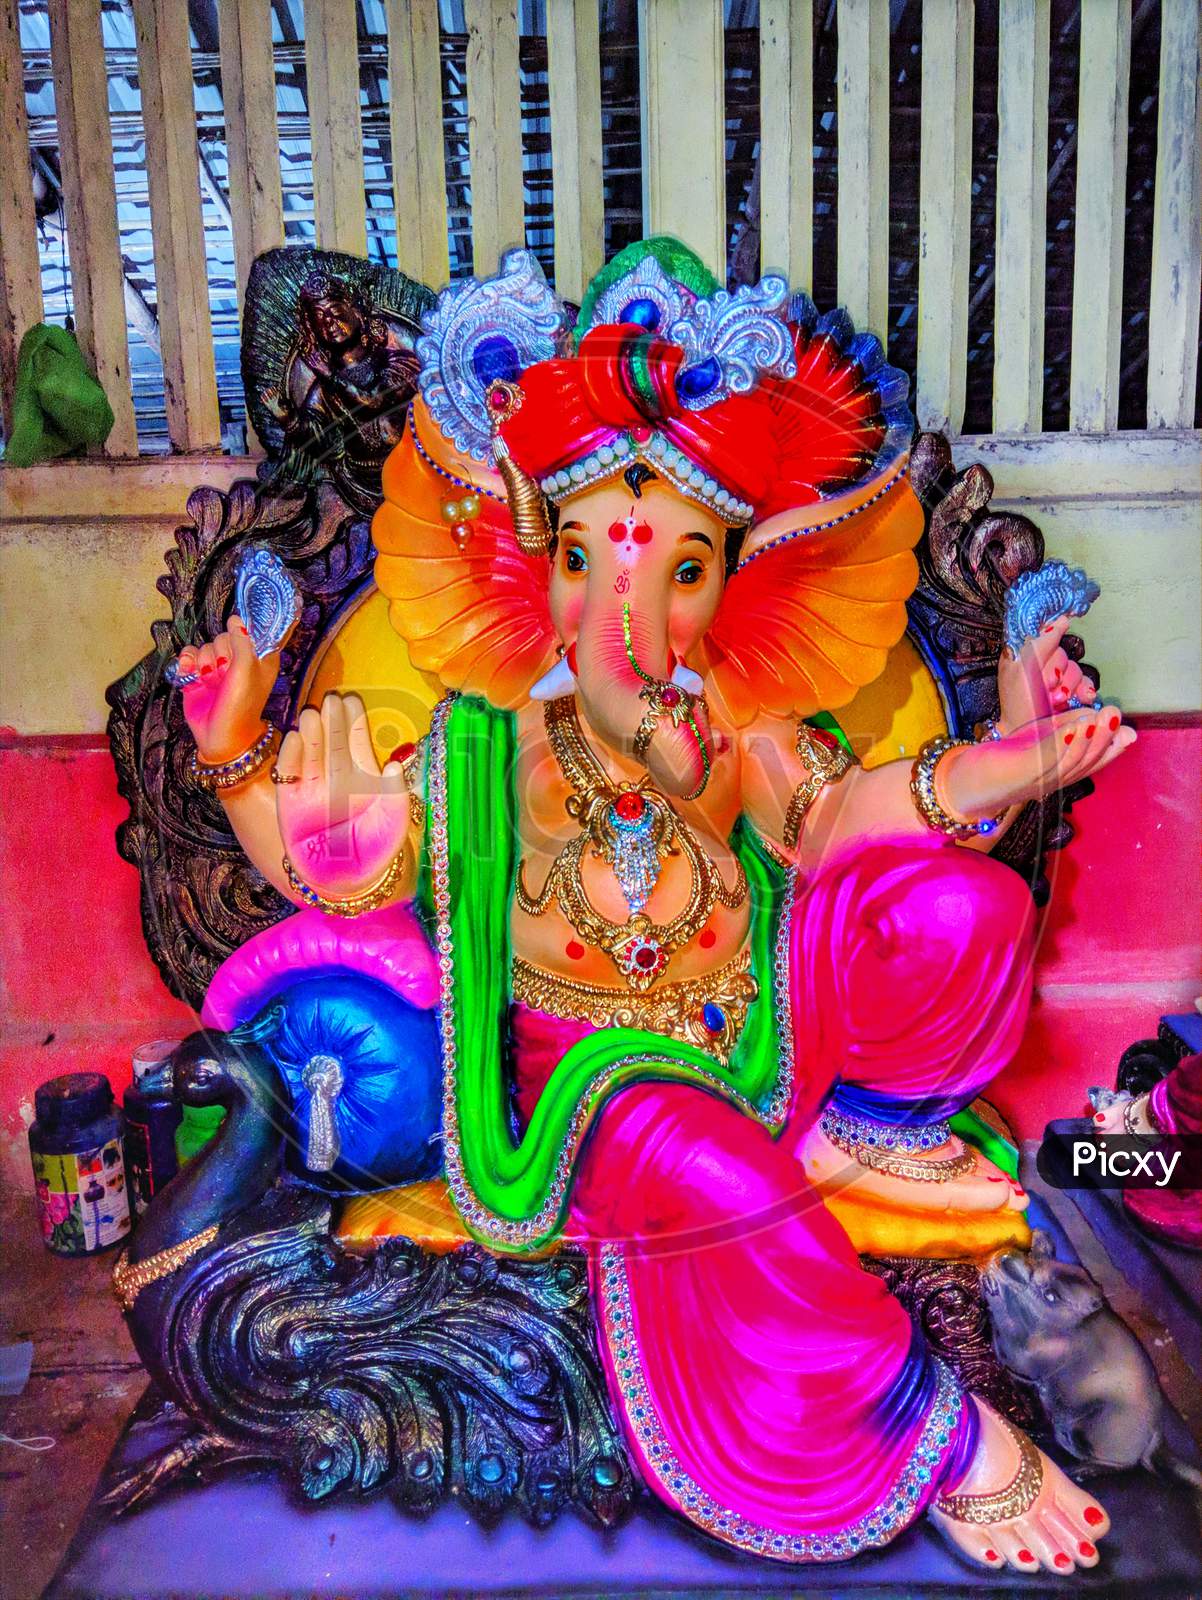 A colourful statue of lord Ganesha